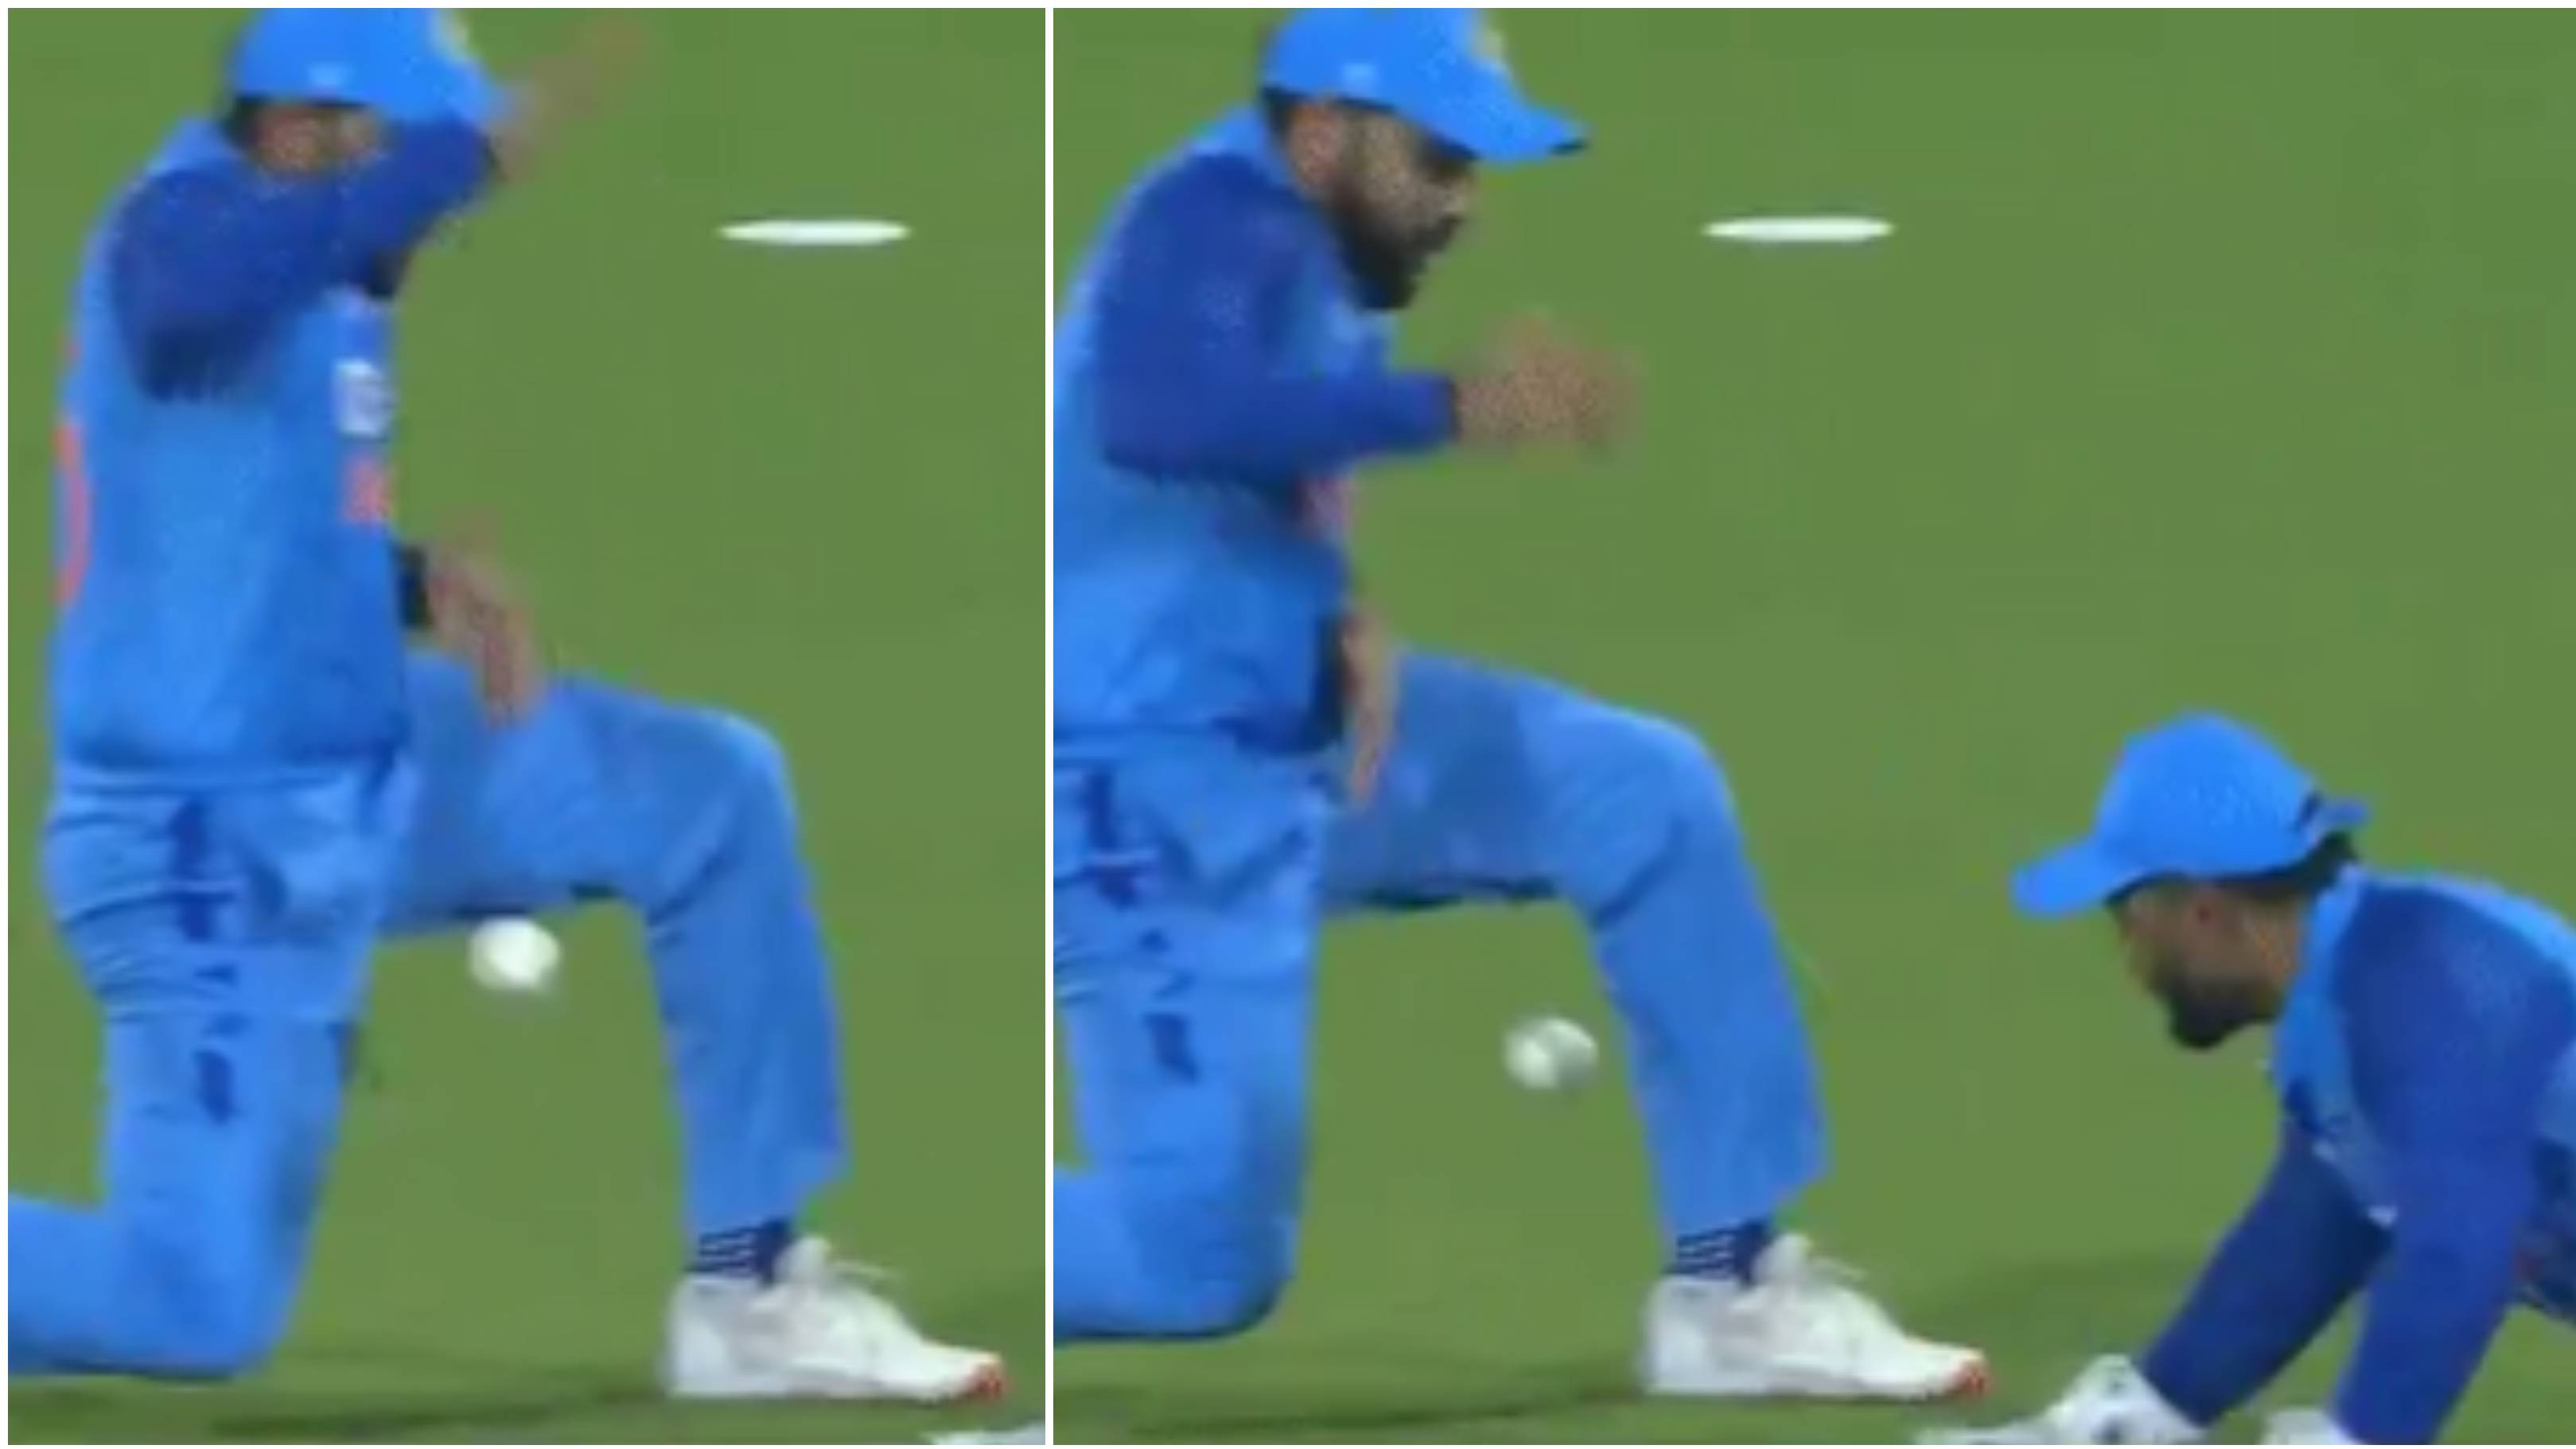 IND v SA 2022: WATCH – Rohit Sharma gets hit in the unprotected area after ball pops out of Rishabh Pant’s hand